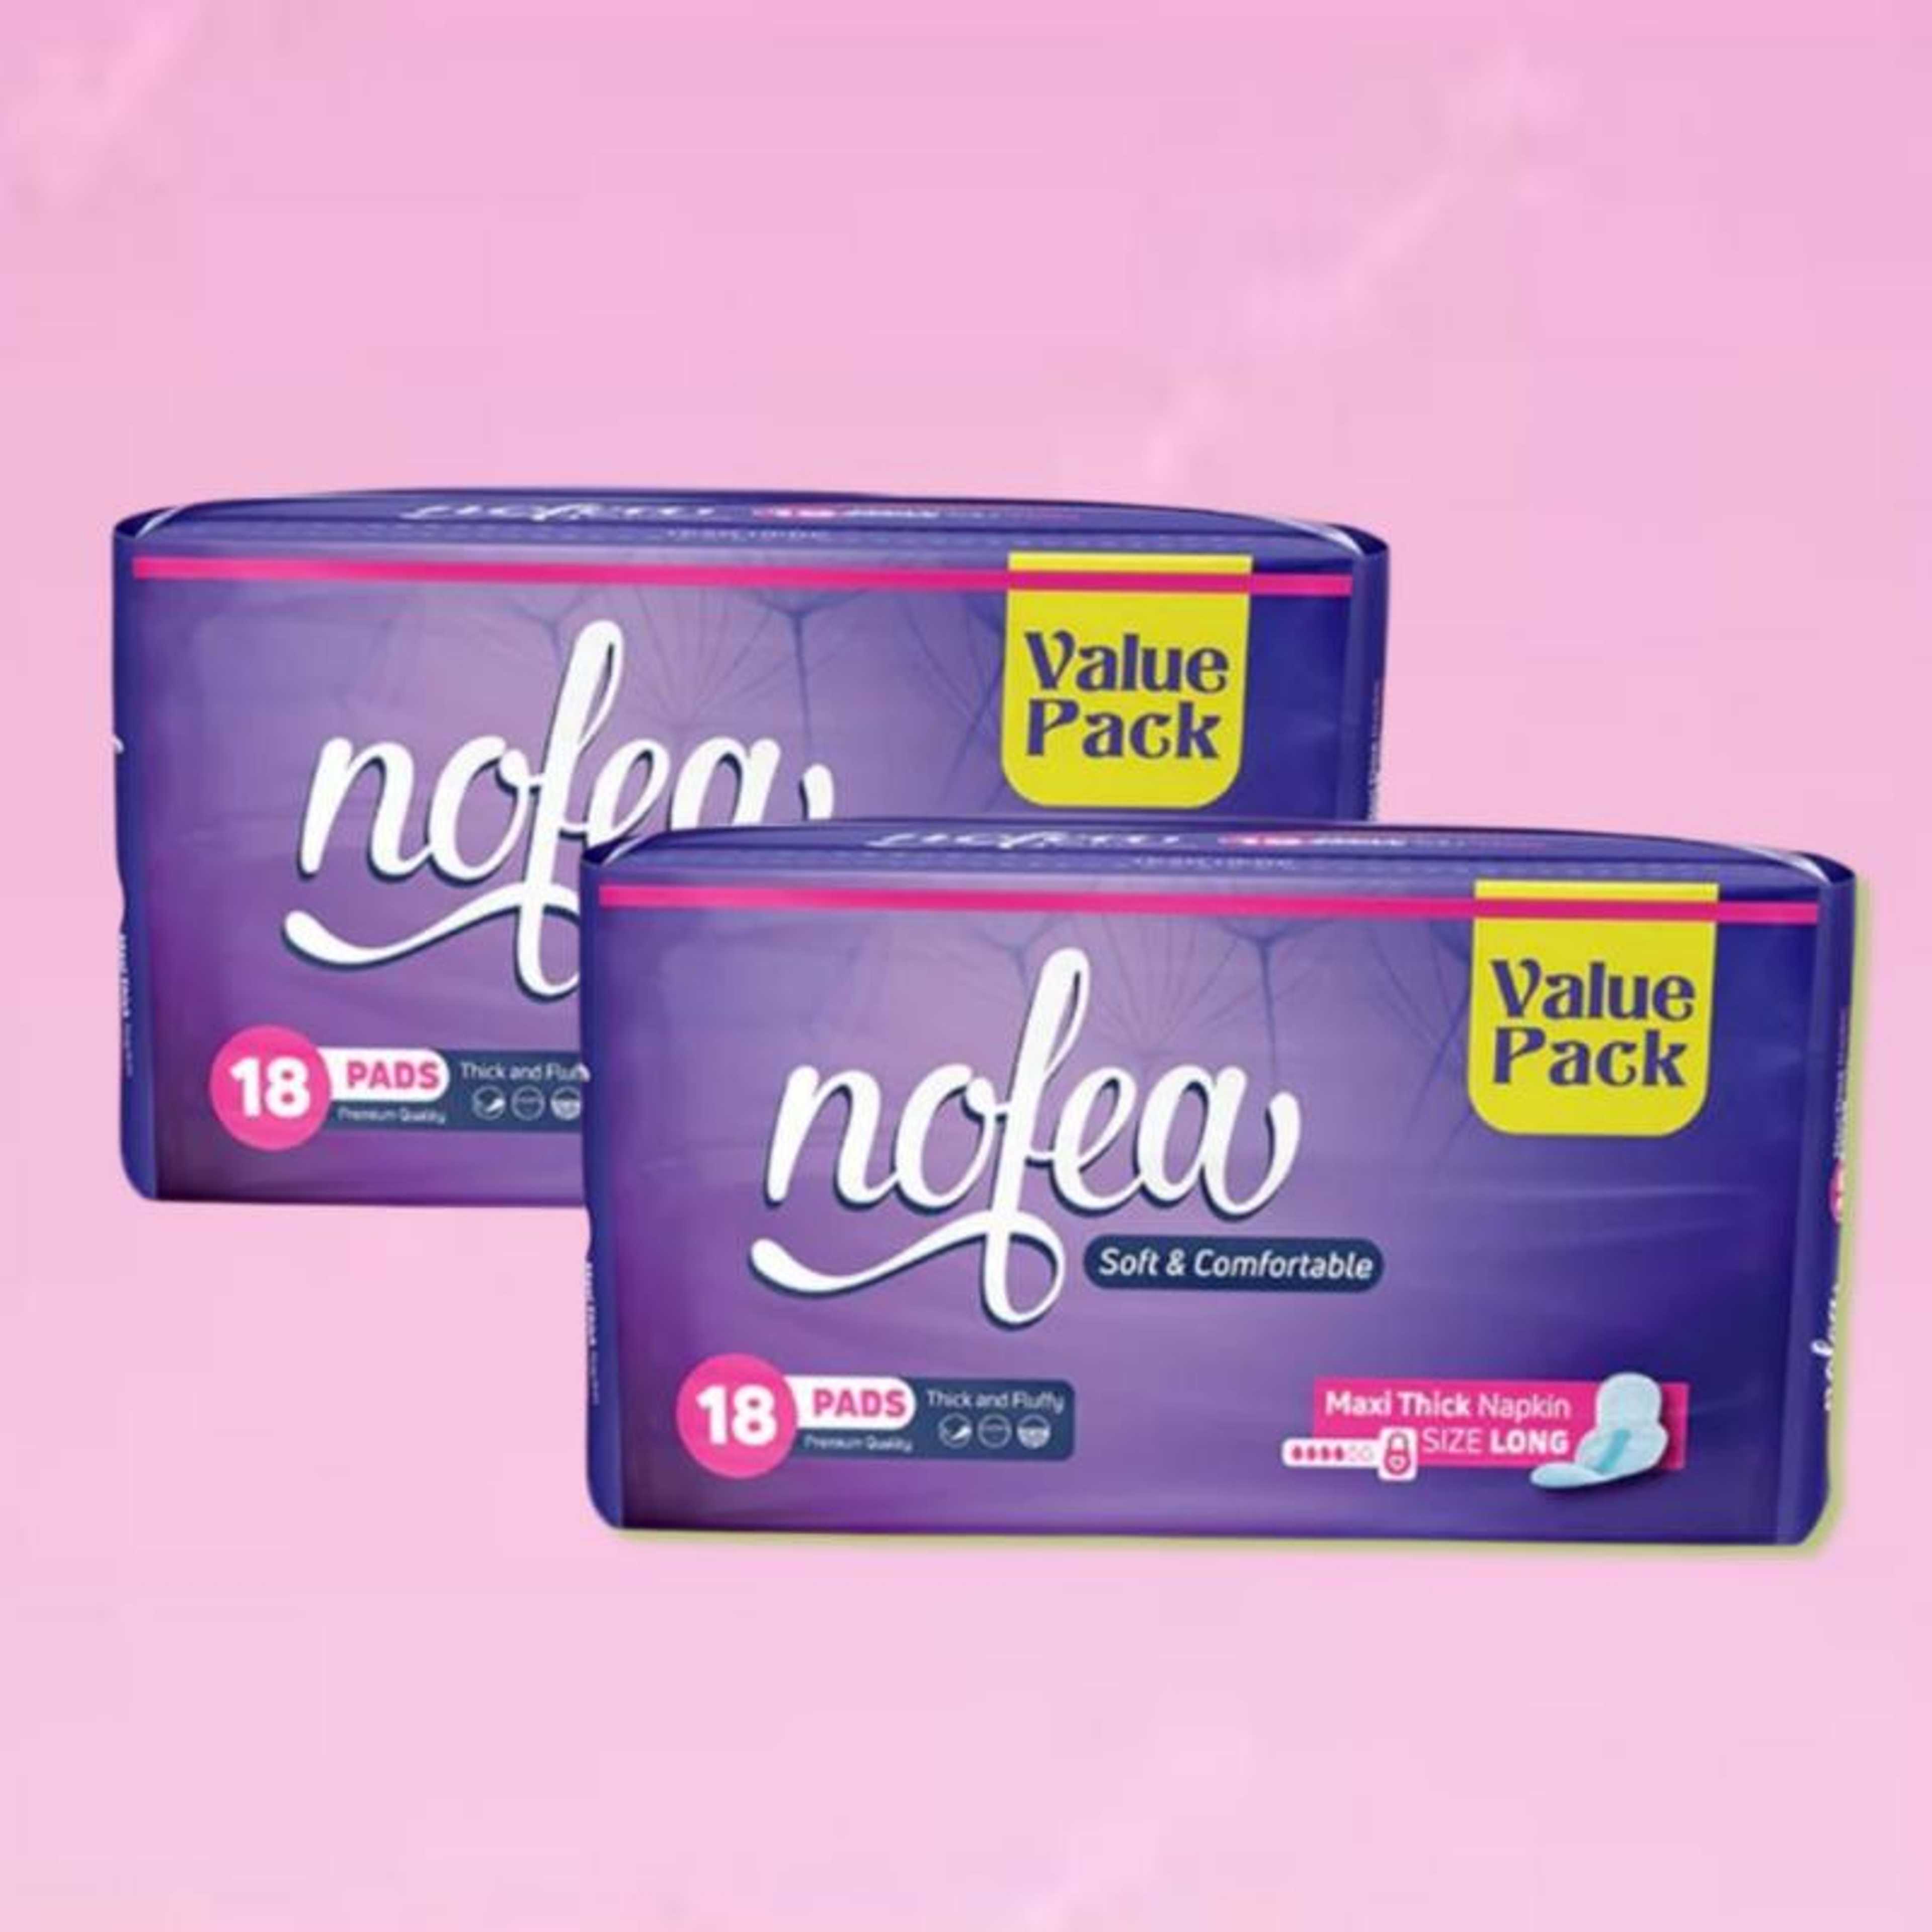 NOFEA PADS Maxi Thick Sanitary Napkin Size LONG (Pack of 2) - Each 18pads